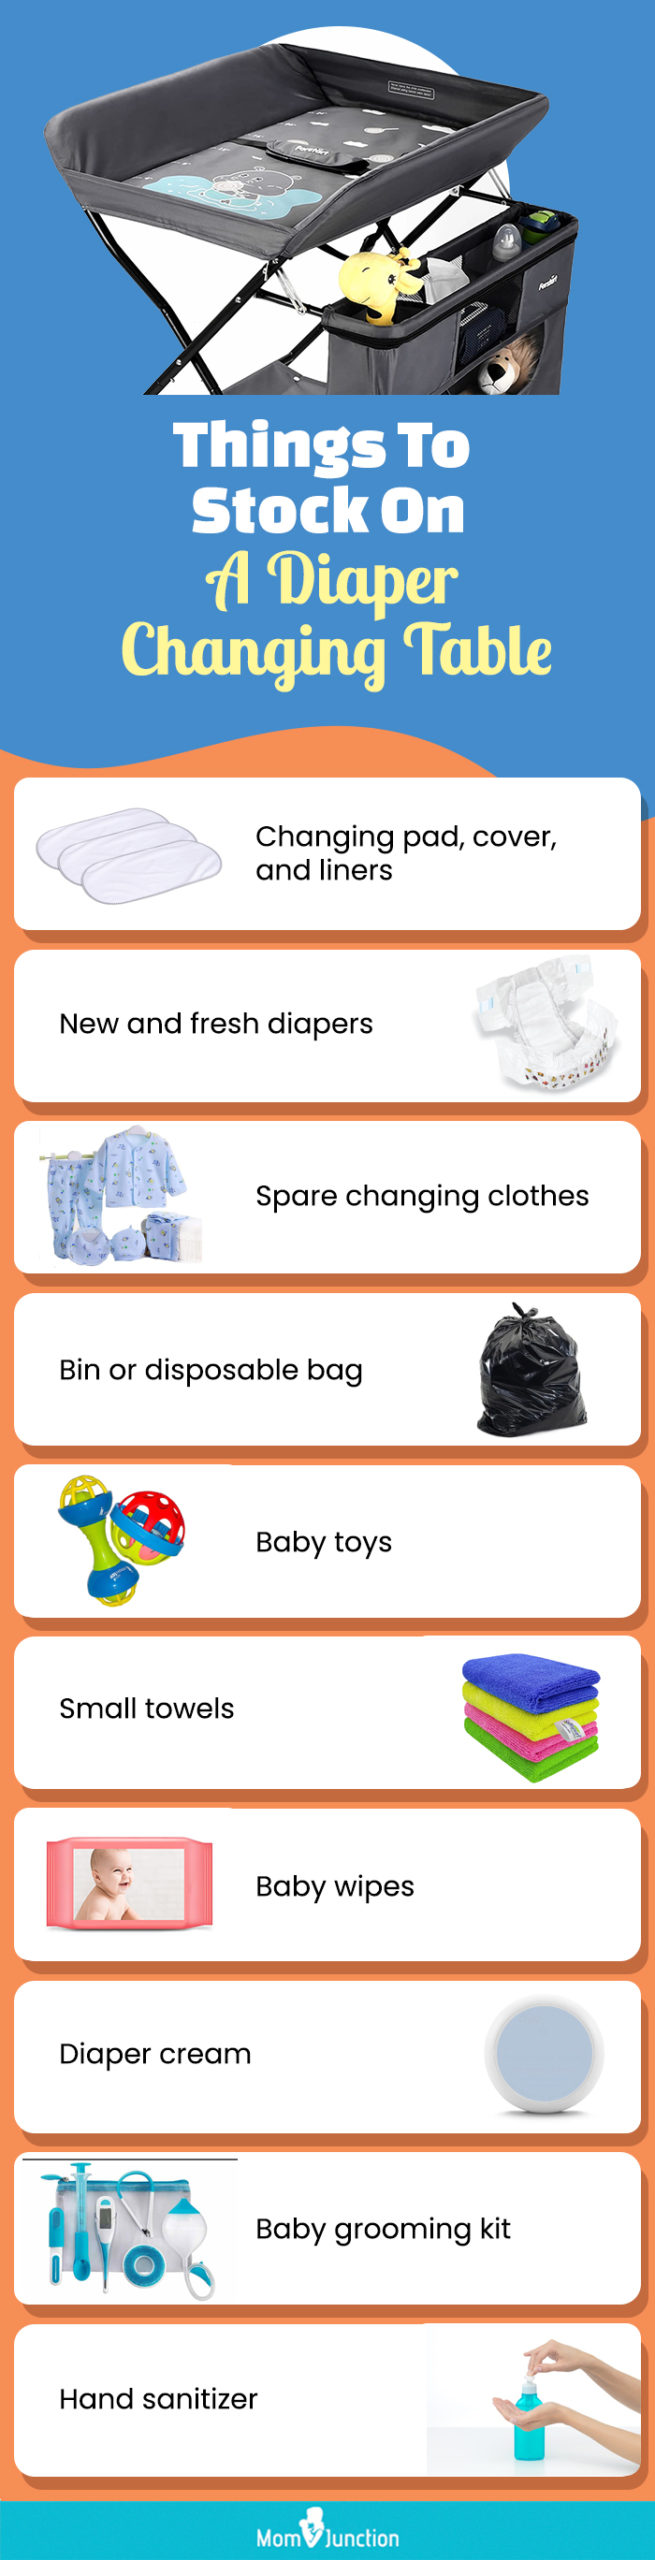 Things To Stock On A Diaper Changing Table (infographic)